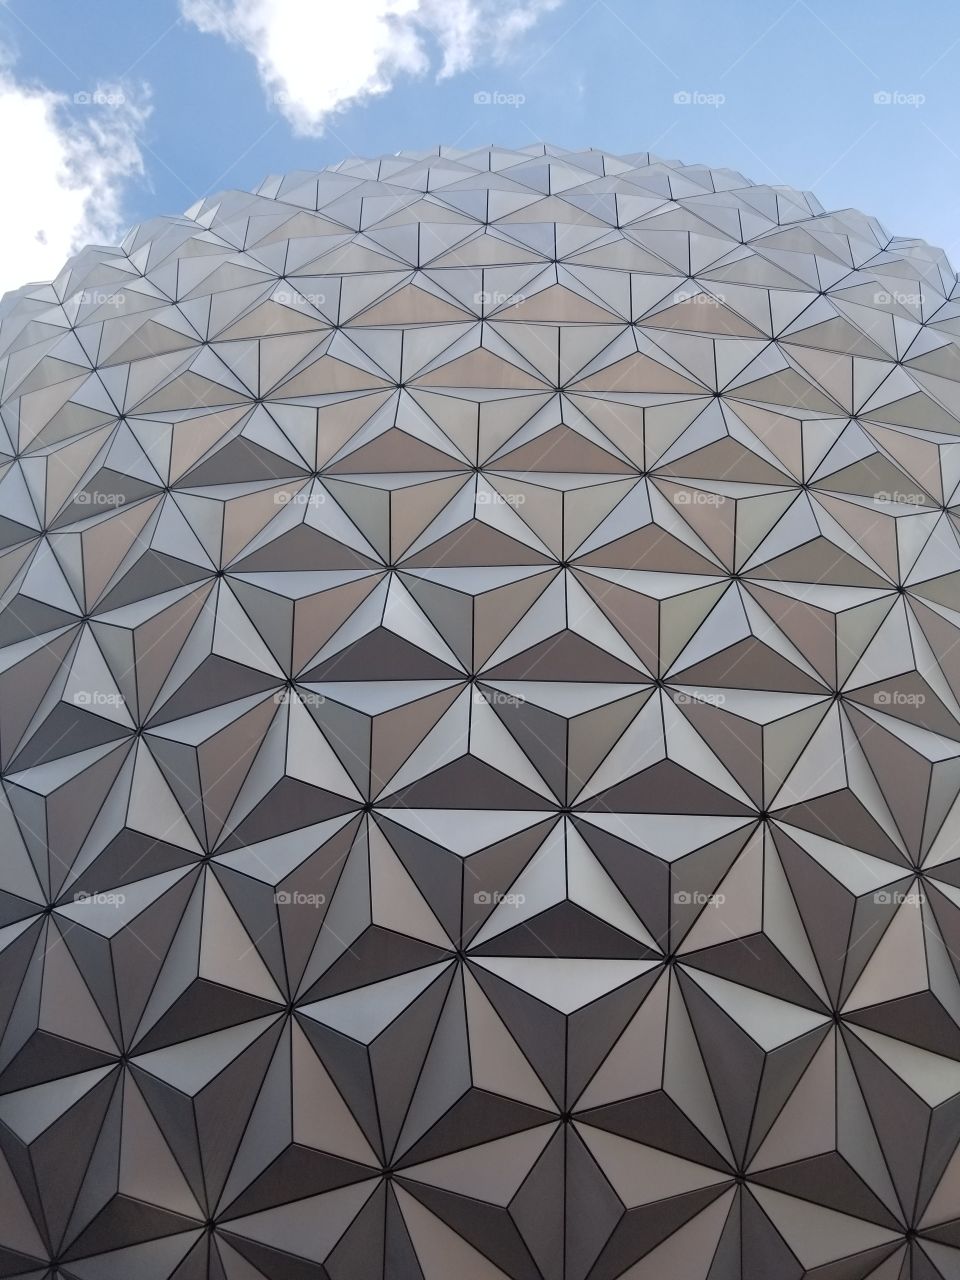 Spaceship Earth Close Up (Epcot)